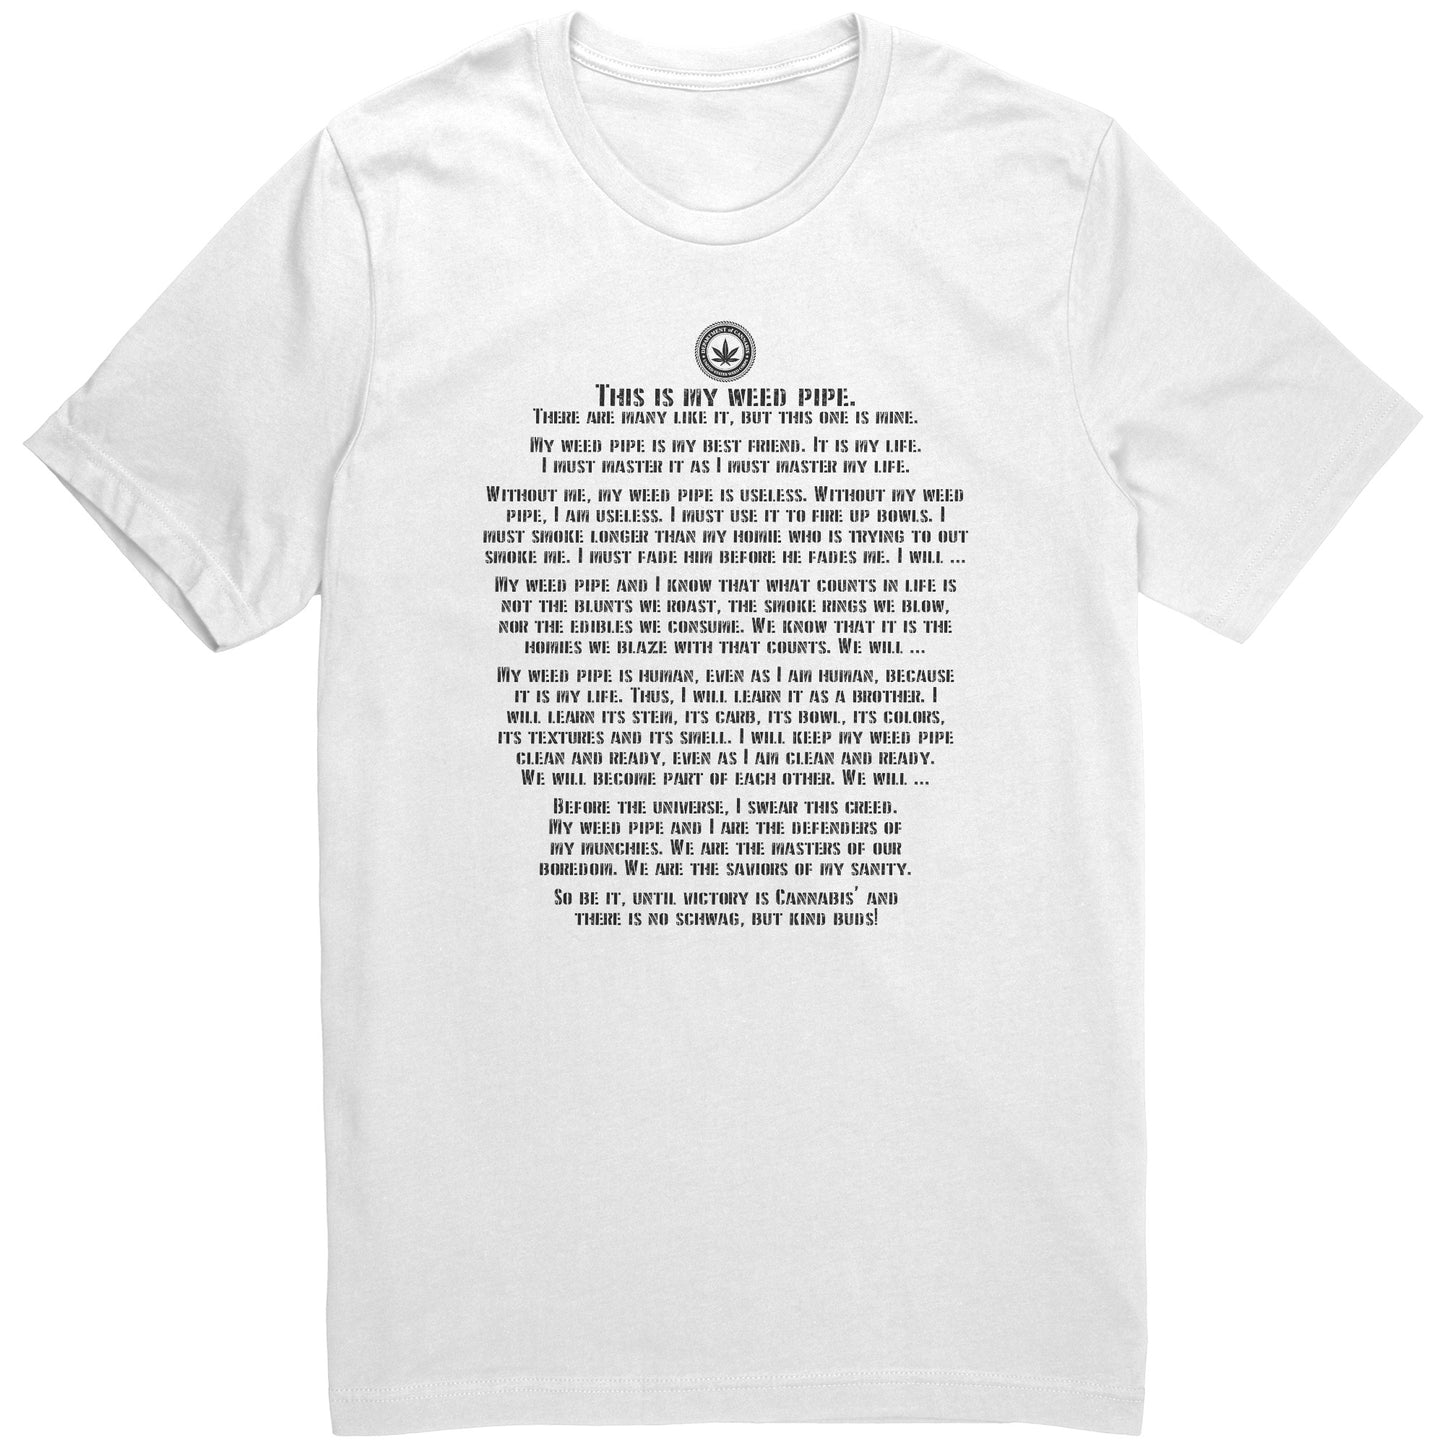 The Weed Pipe Creed Tee